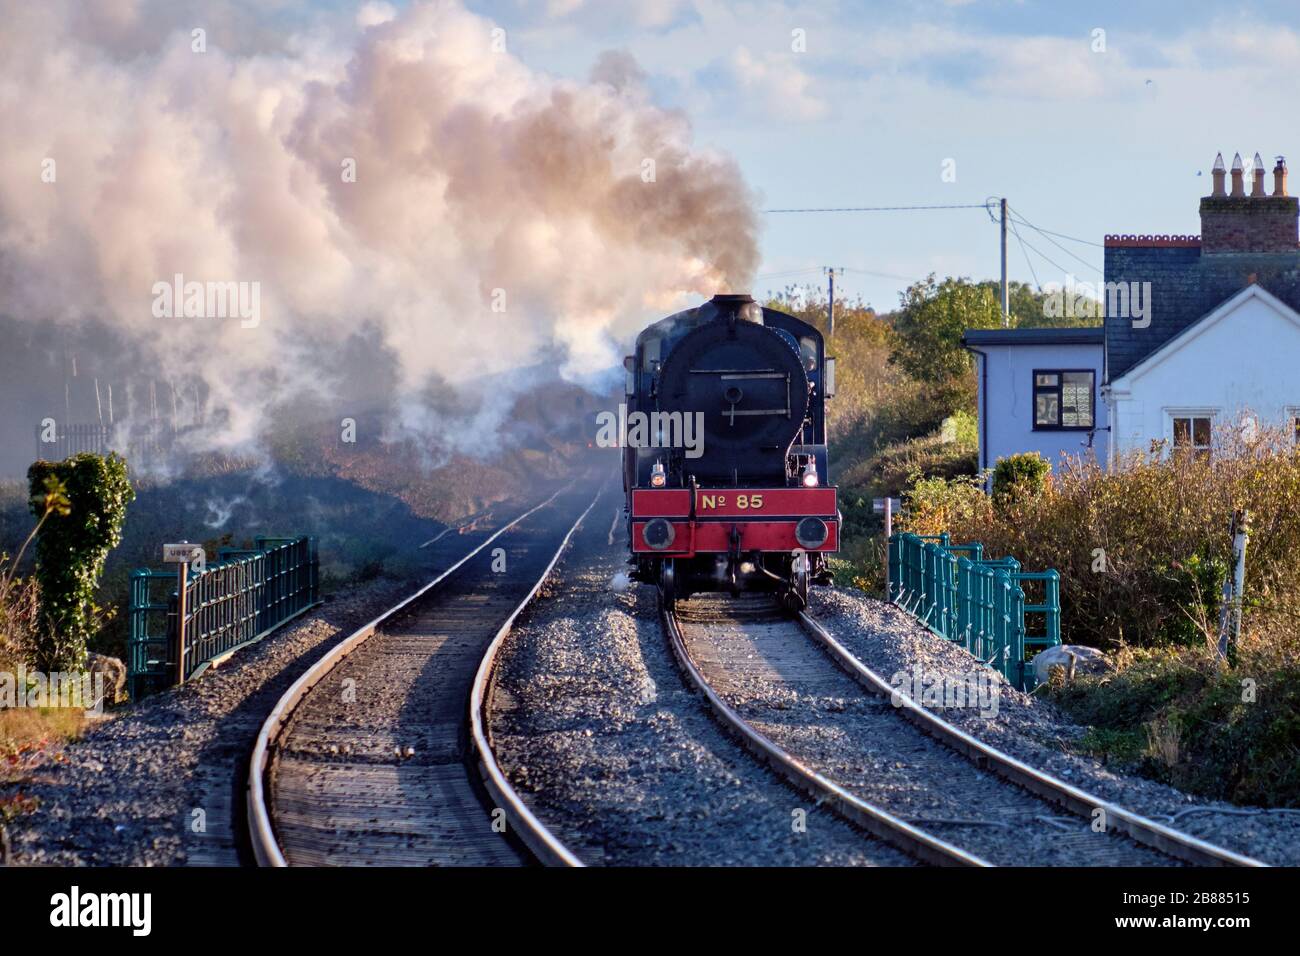 NO 85 Merlin Steam train front view as it rides up track in Ireland, passing a house close to tracks Stock Photo